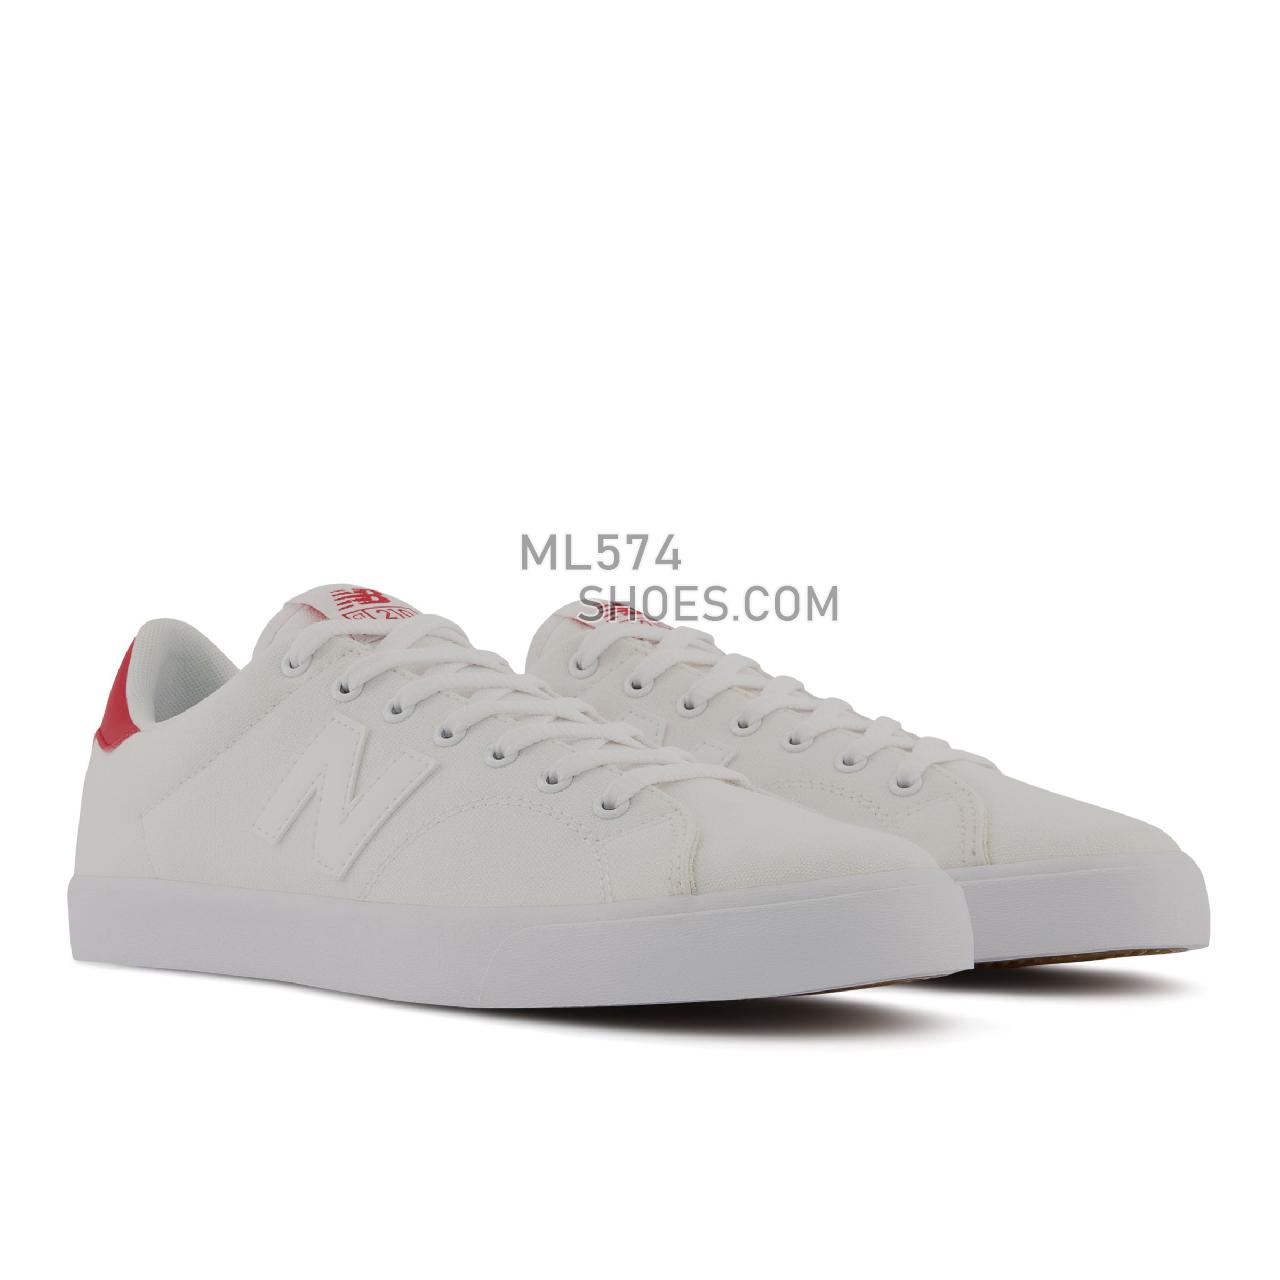 New Balance CT210 - Unisex Men's Women's Court Classics - White with Red - CT210WWR